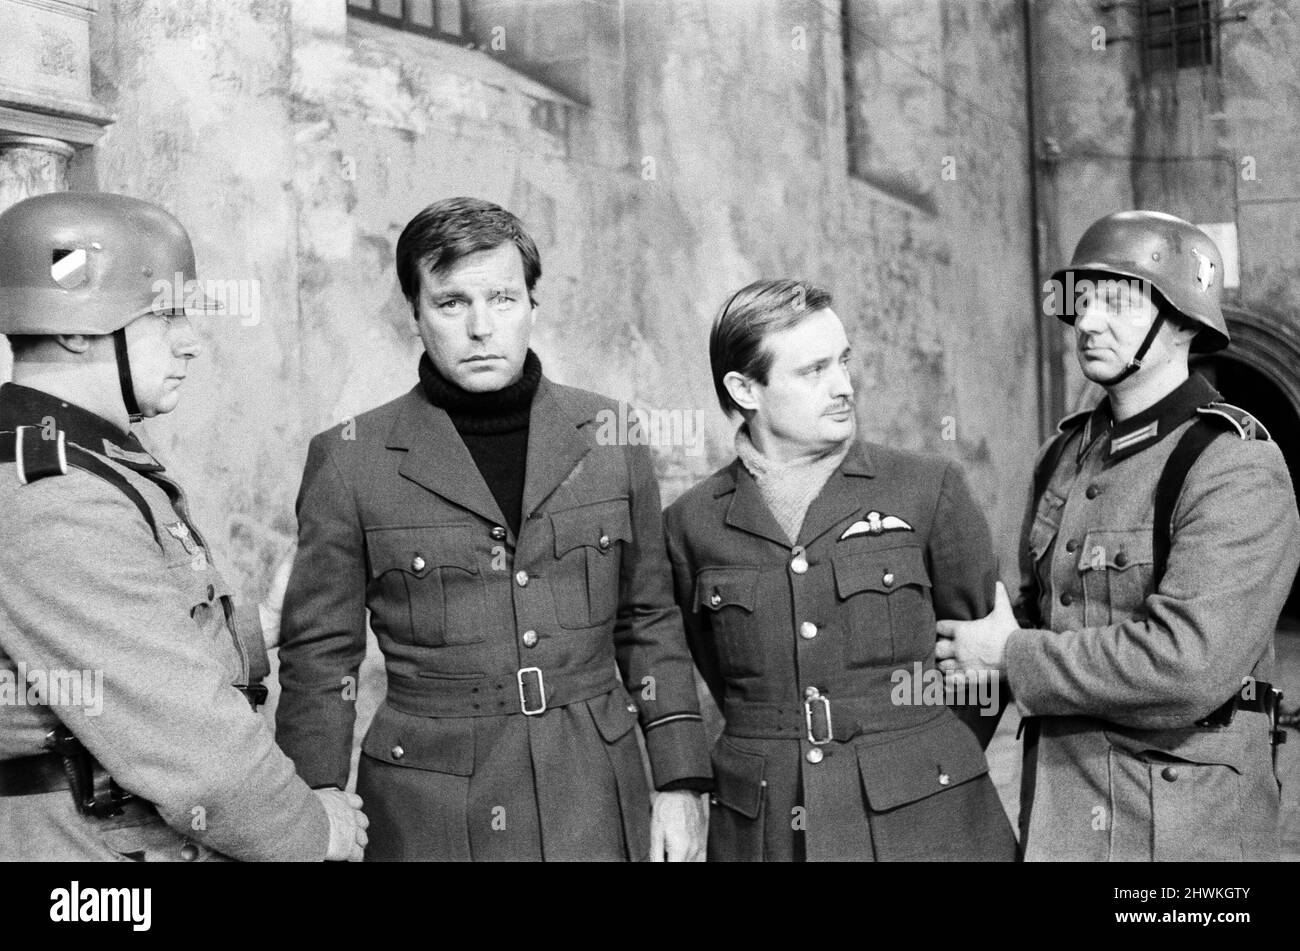 Colditz, Photo-call for new BBC television series, actors pose for the cameras on first day of filming, Ealing Studios, London, 19th June 1972.  Pictured, Robert Wagner as Flight Lieutenant Phil Carrington and David McCallum as Flight Lieutenant Simon Carter. Stock Photo